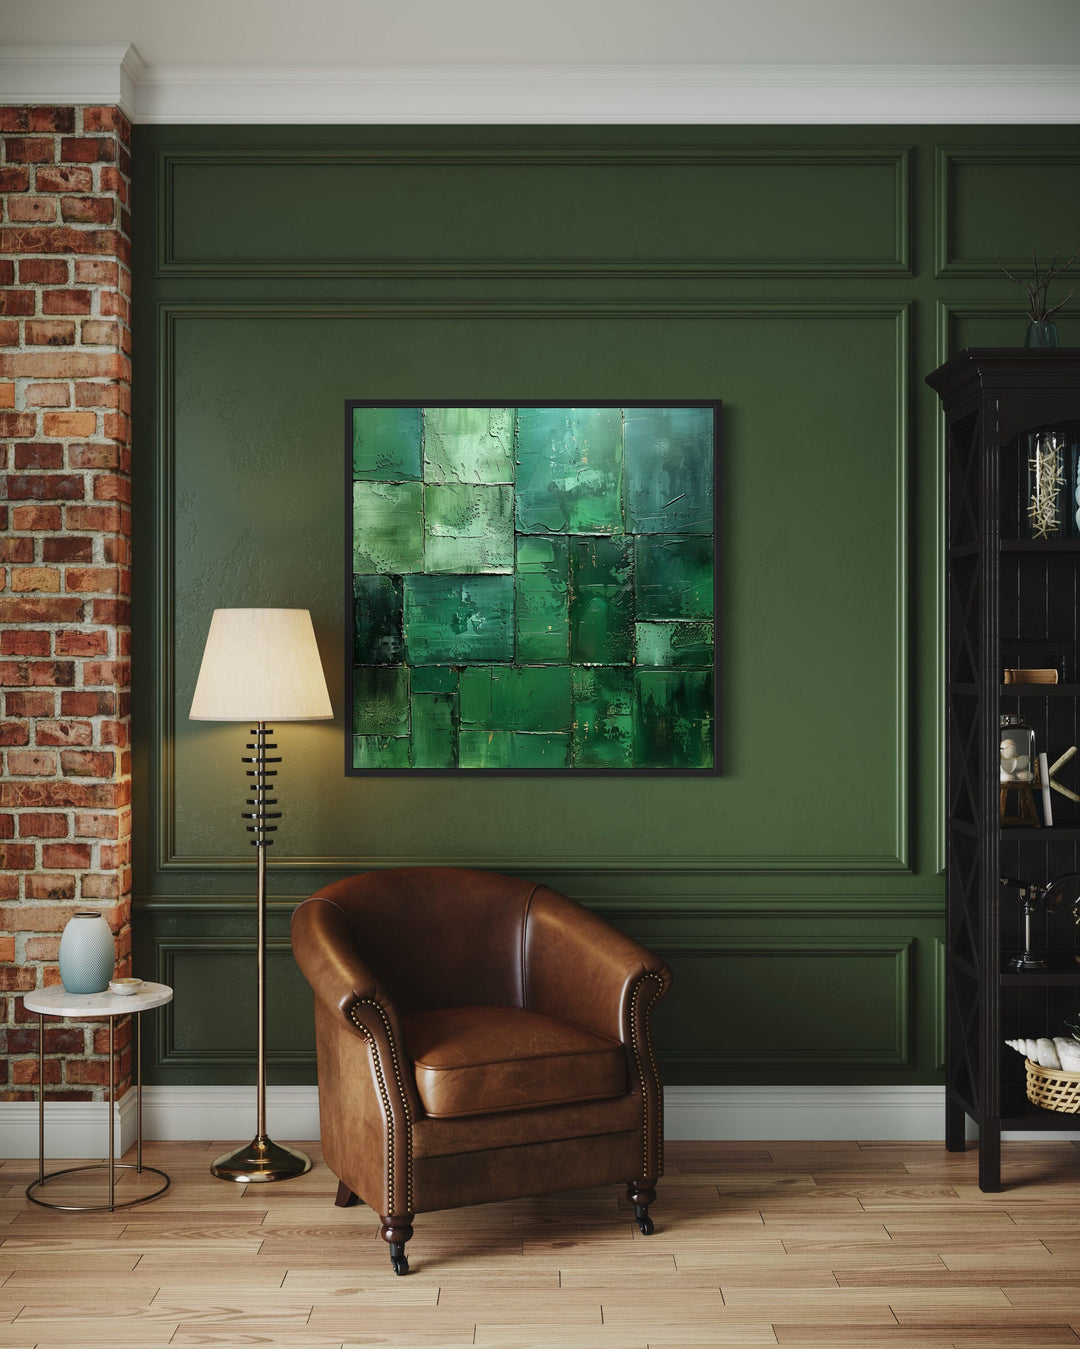 Emerald Green Abstract Geometric Square Framed Canvas Wall Art in living room